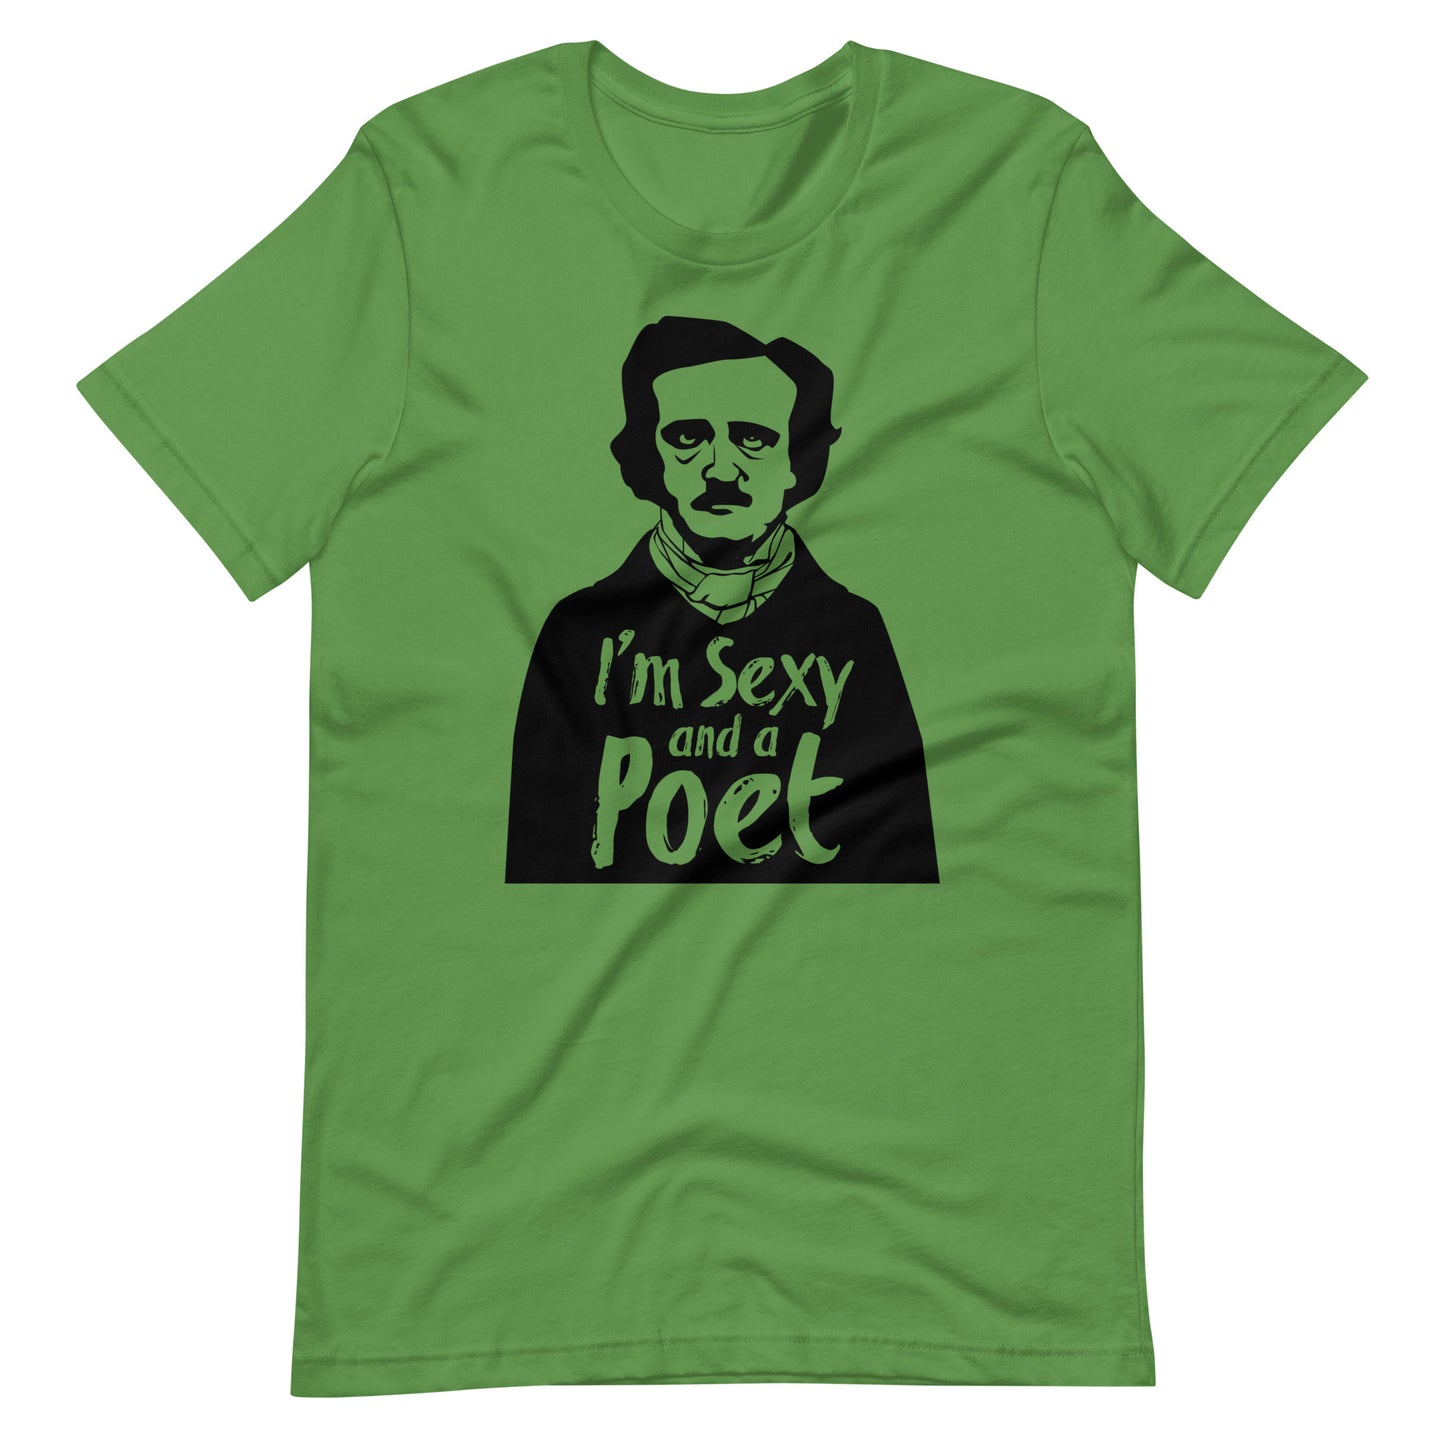 Women's Edgar Allan Poe "I'm Sexy and a Poet" t-shirt - Leaf Front